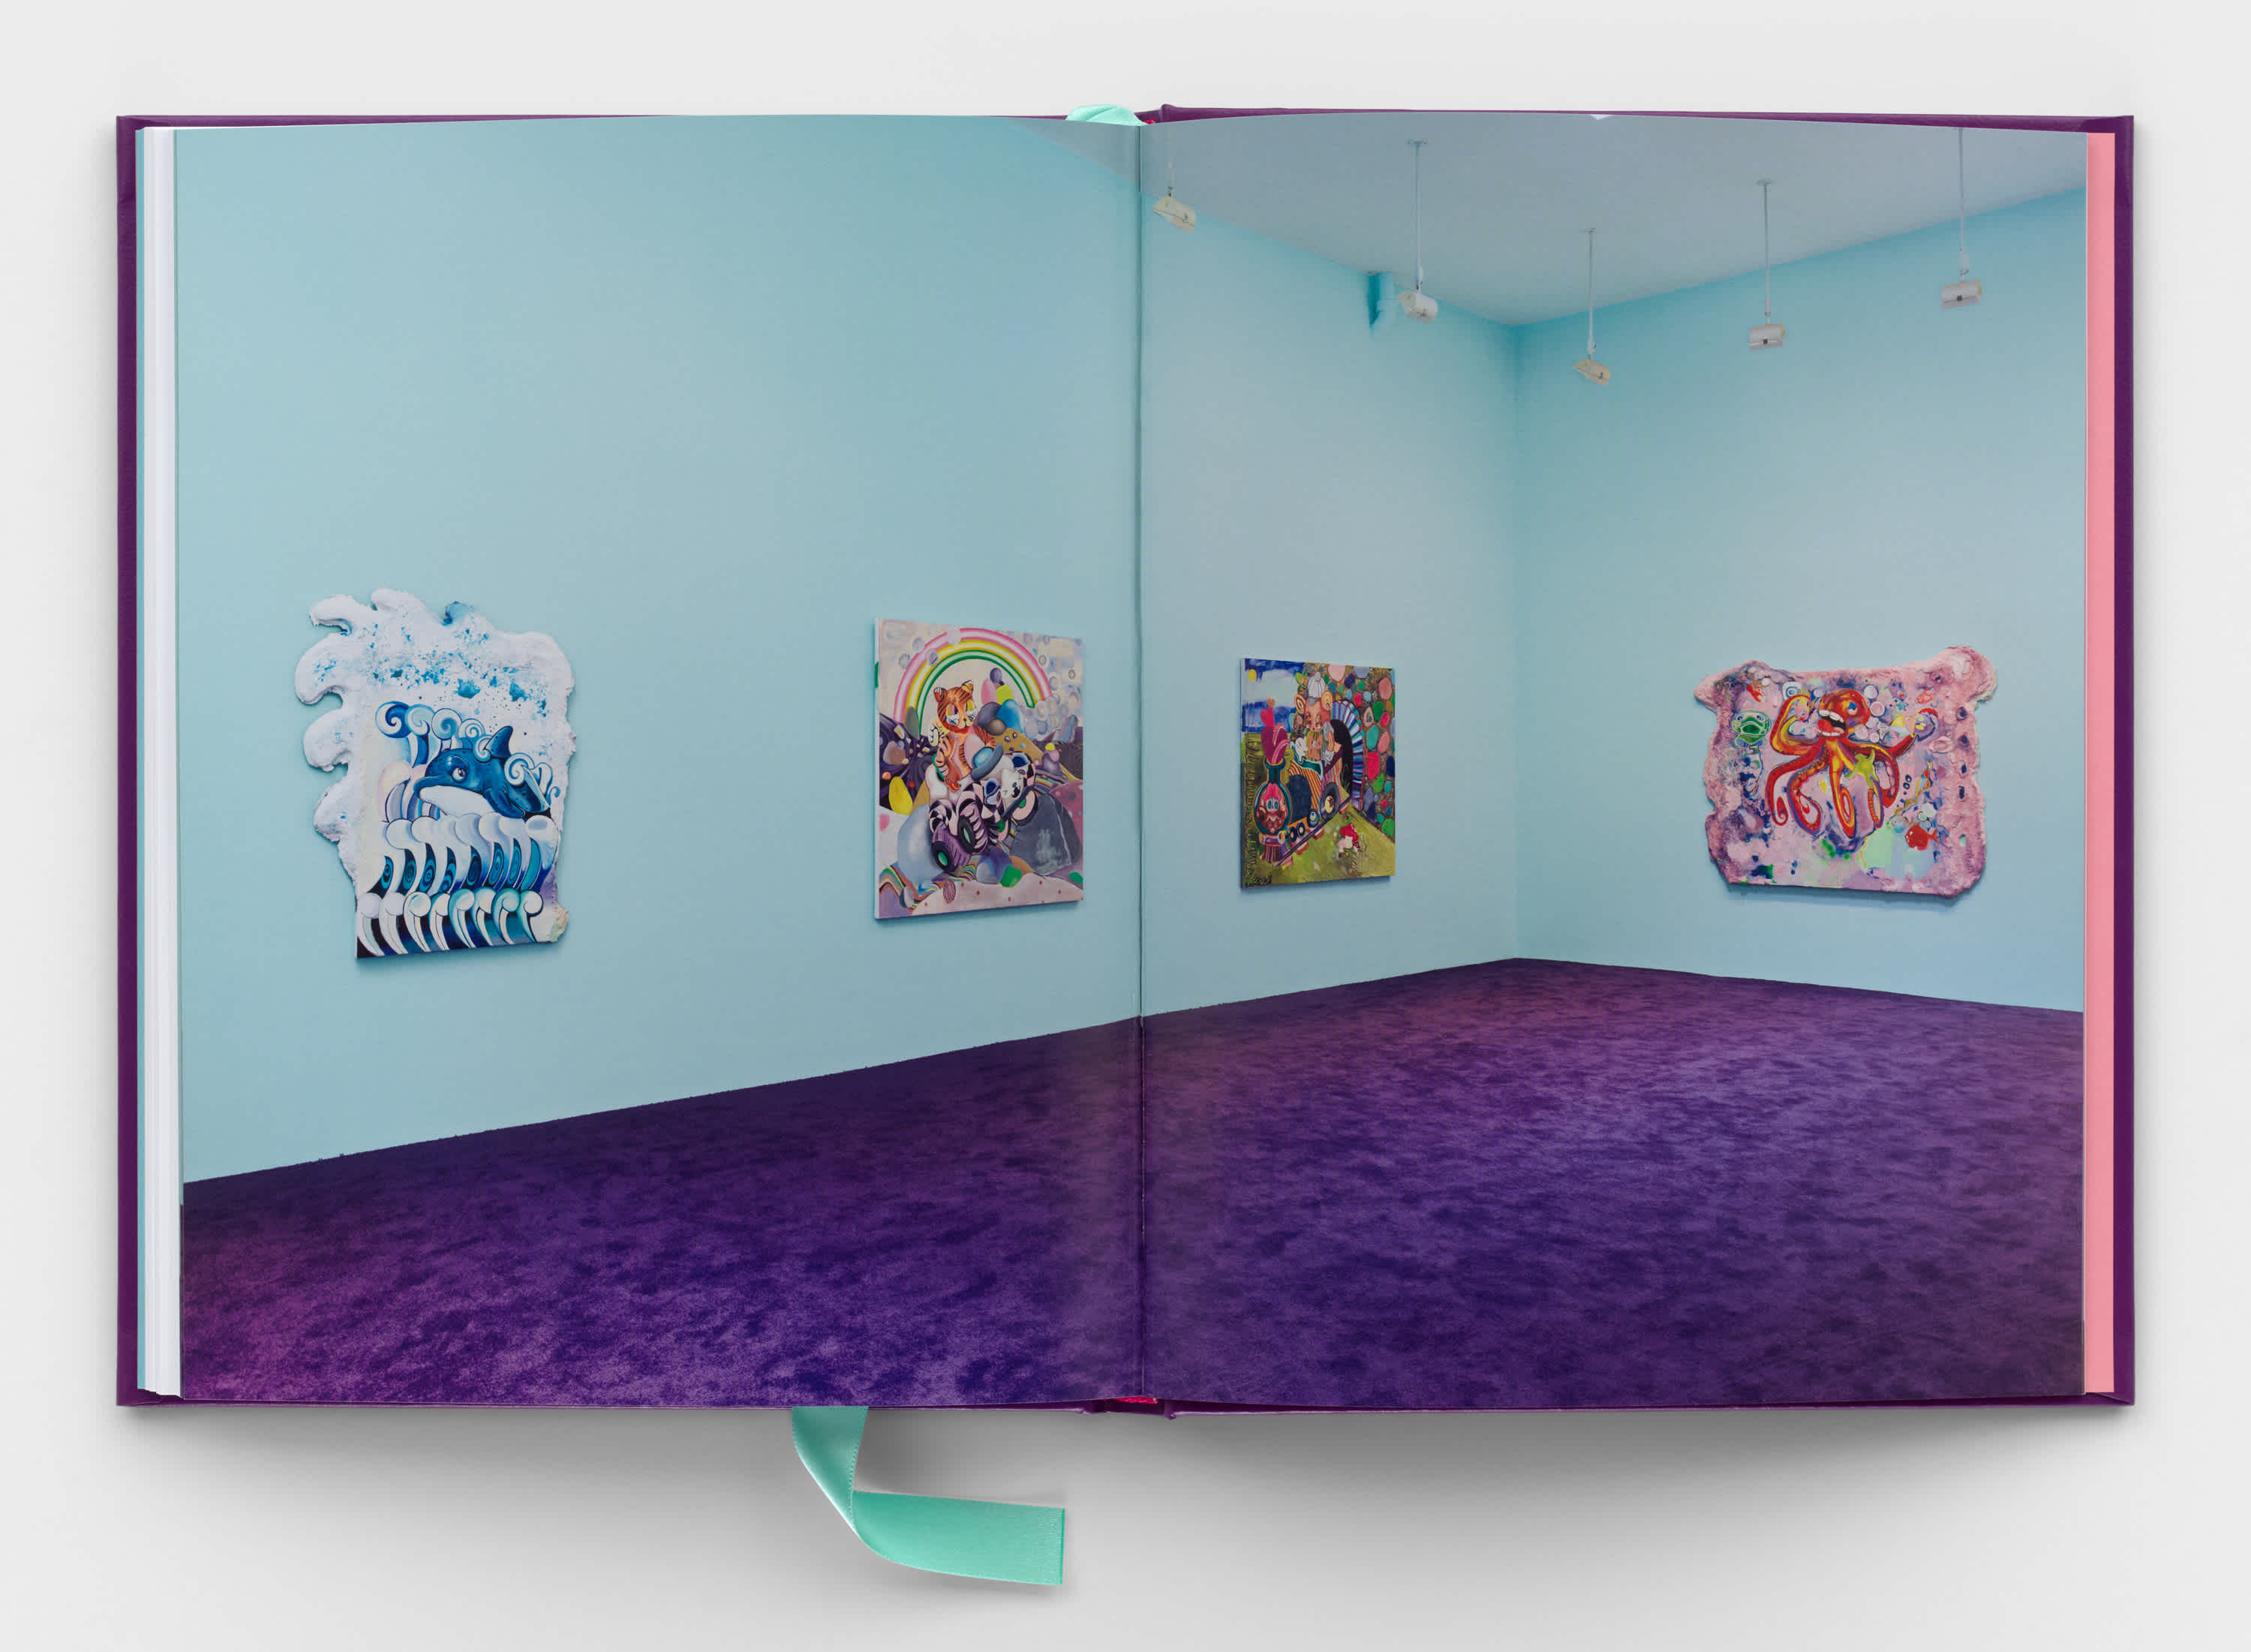 A book centerfold that shows a full bleed image of an exhibition. It's a corner of a room in which four colorful paintings hang on a light blue wall. The carpet on the floor is deep purple.